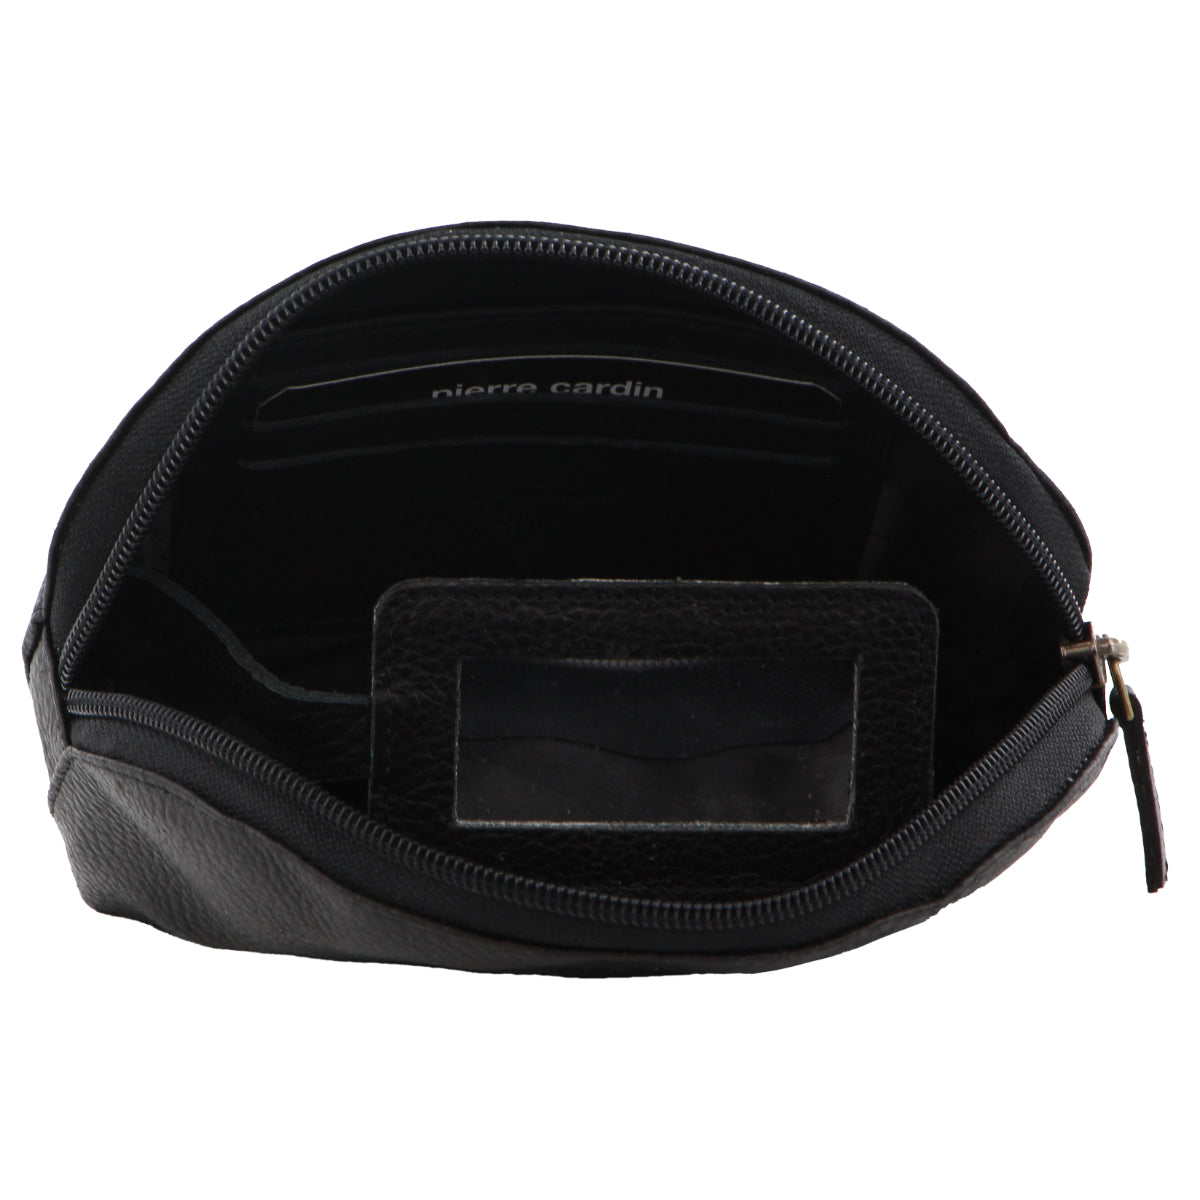 Pierre Cardin Leather Ladies Coin Purse in Black